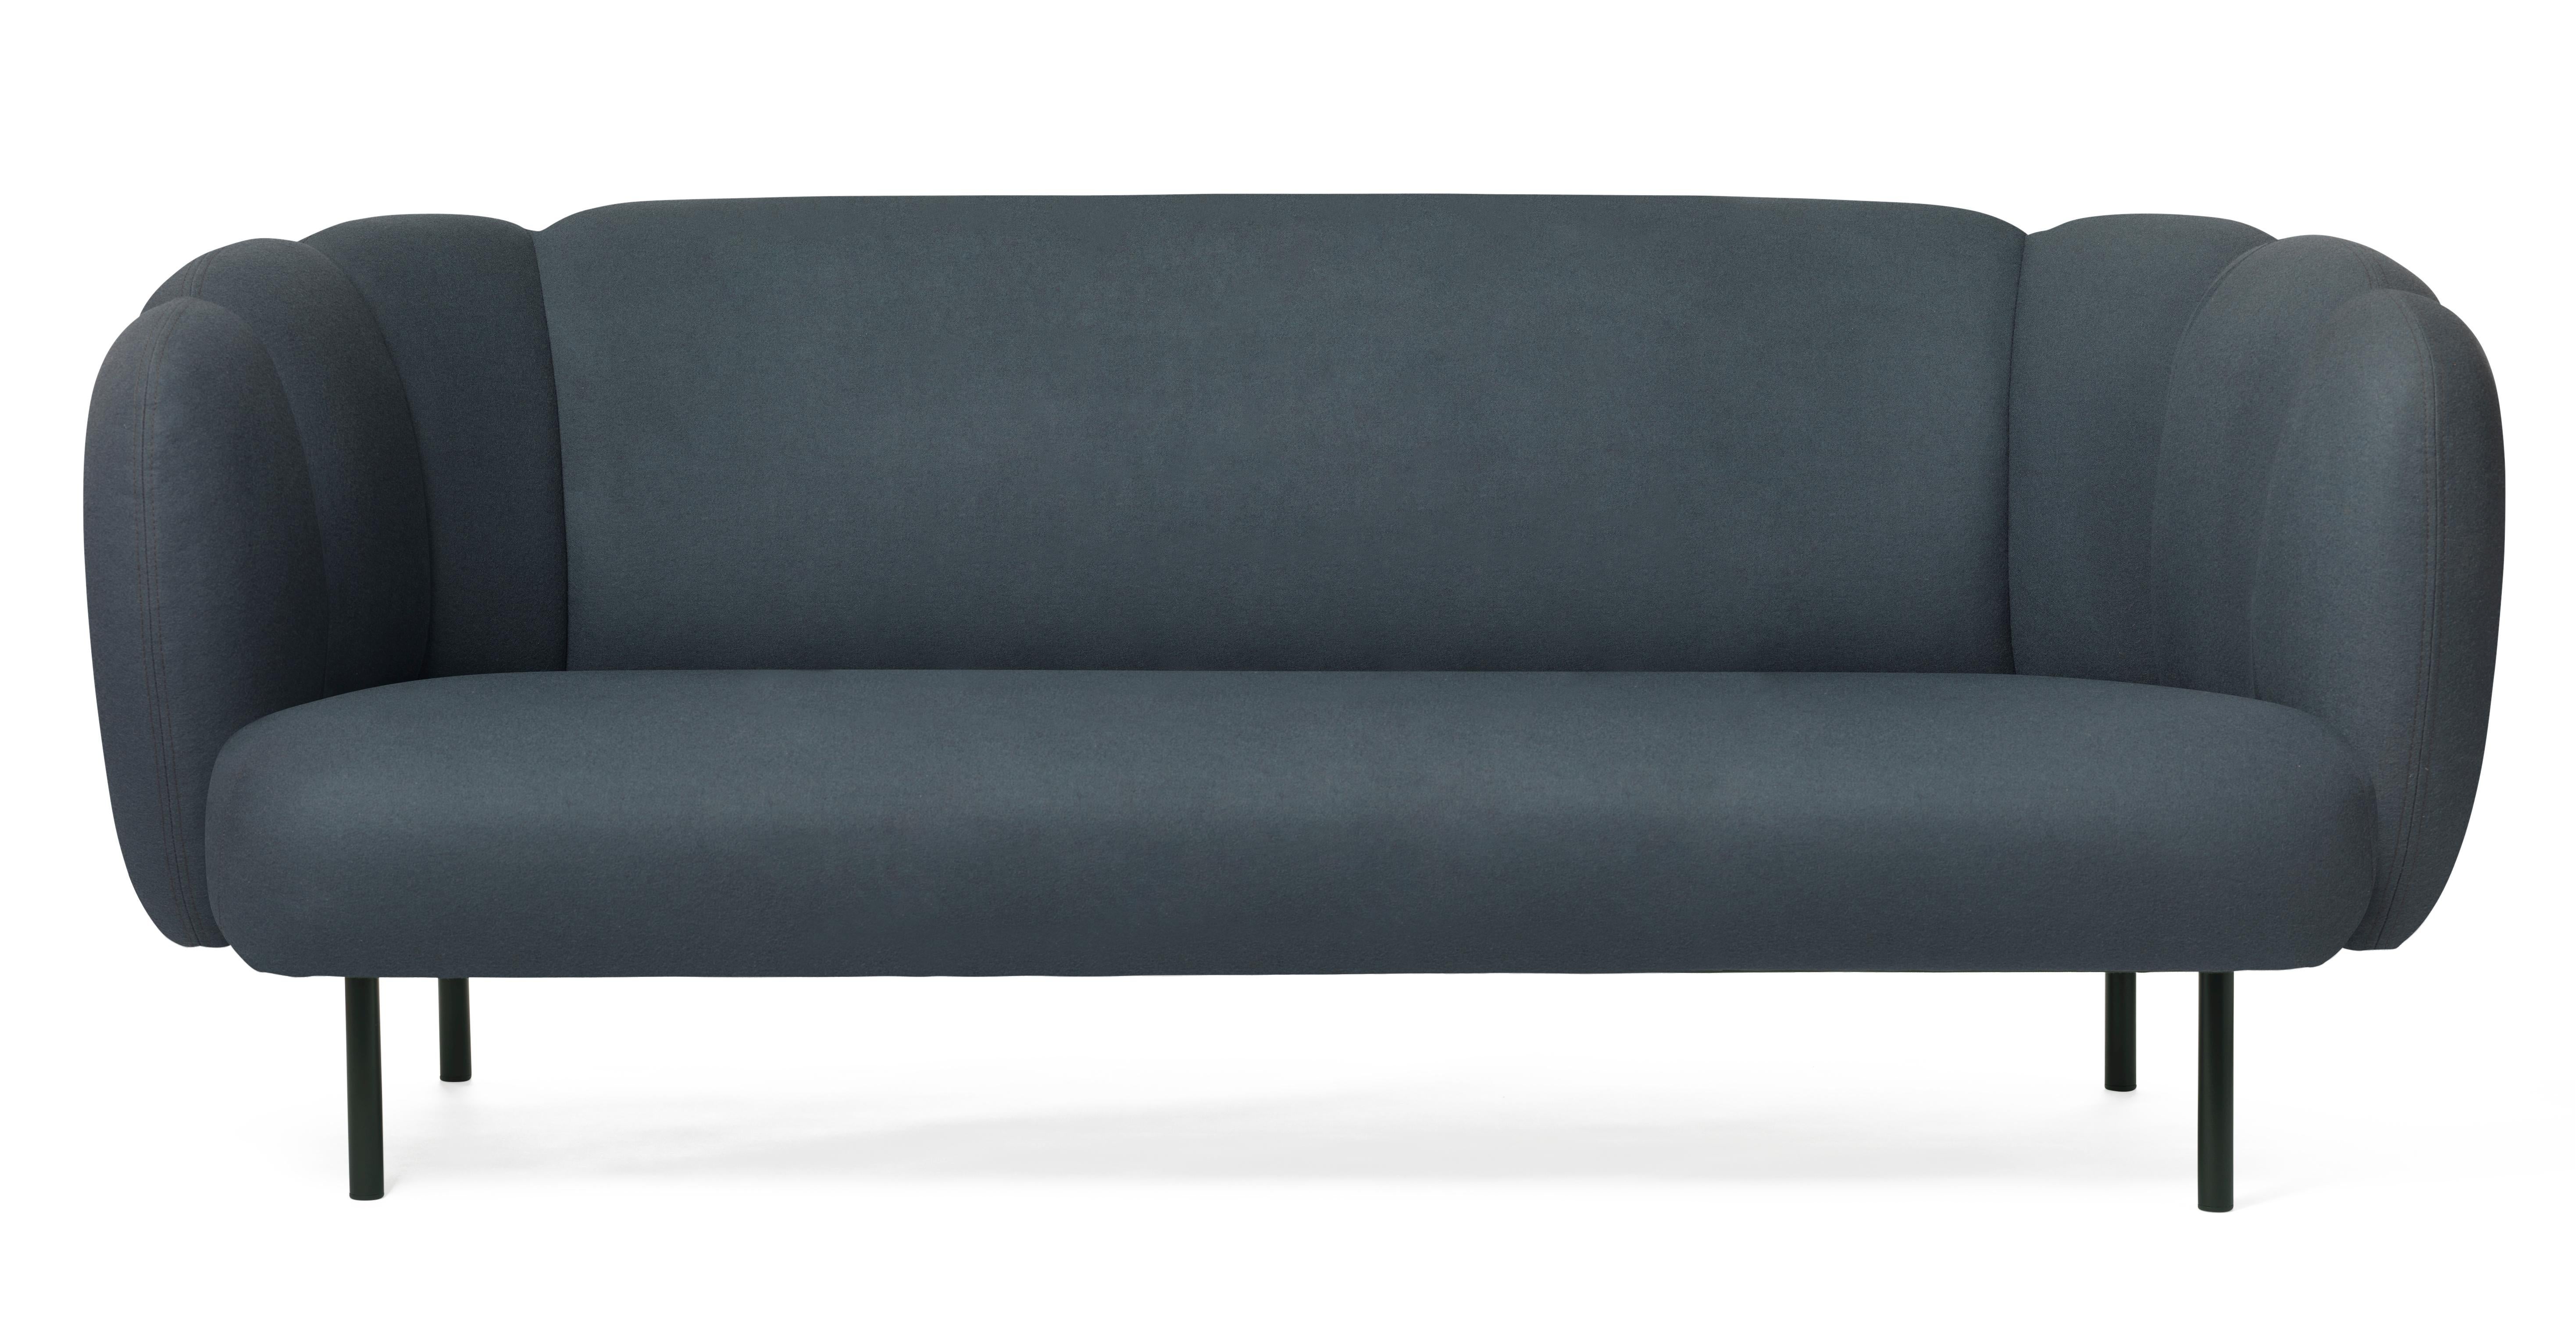 For Sale: Blue (Hero 991) Cape 3-Seat Stitch Sofa, by Charlotte Høncke from Warm Nordic